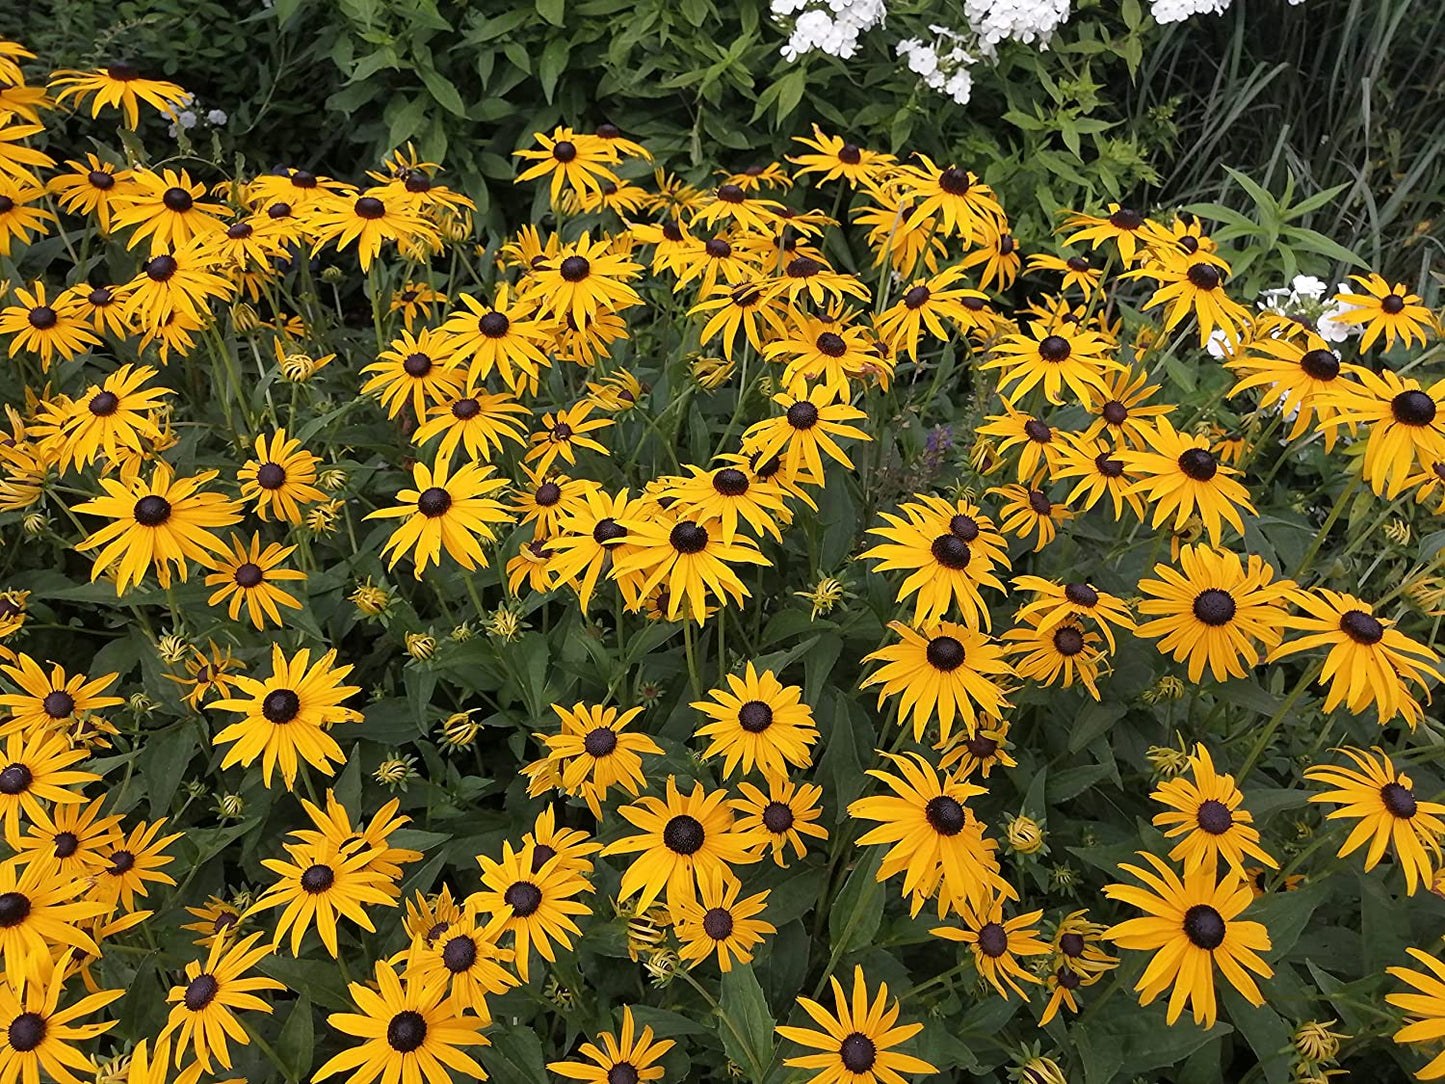 Hundredfold Black-Eyed Susan Wild Flower 500 Seeds - Rudbeckia hirta Canada Native Wildflower, Black Eyed Susan, Excellent for Bee and Butterfly Garden